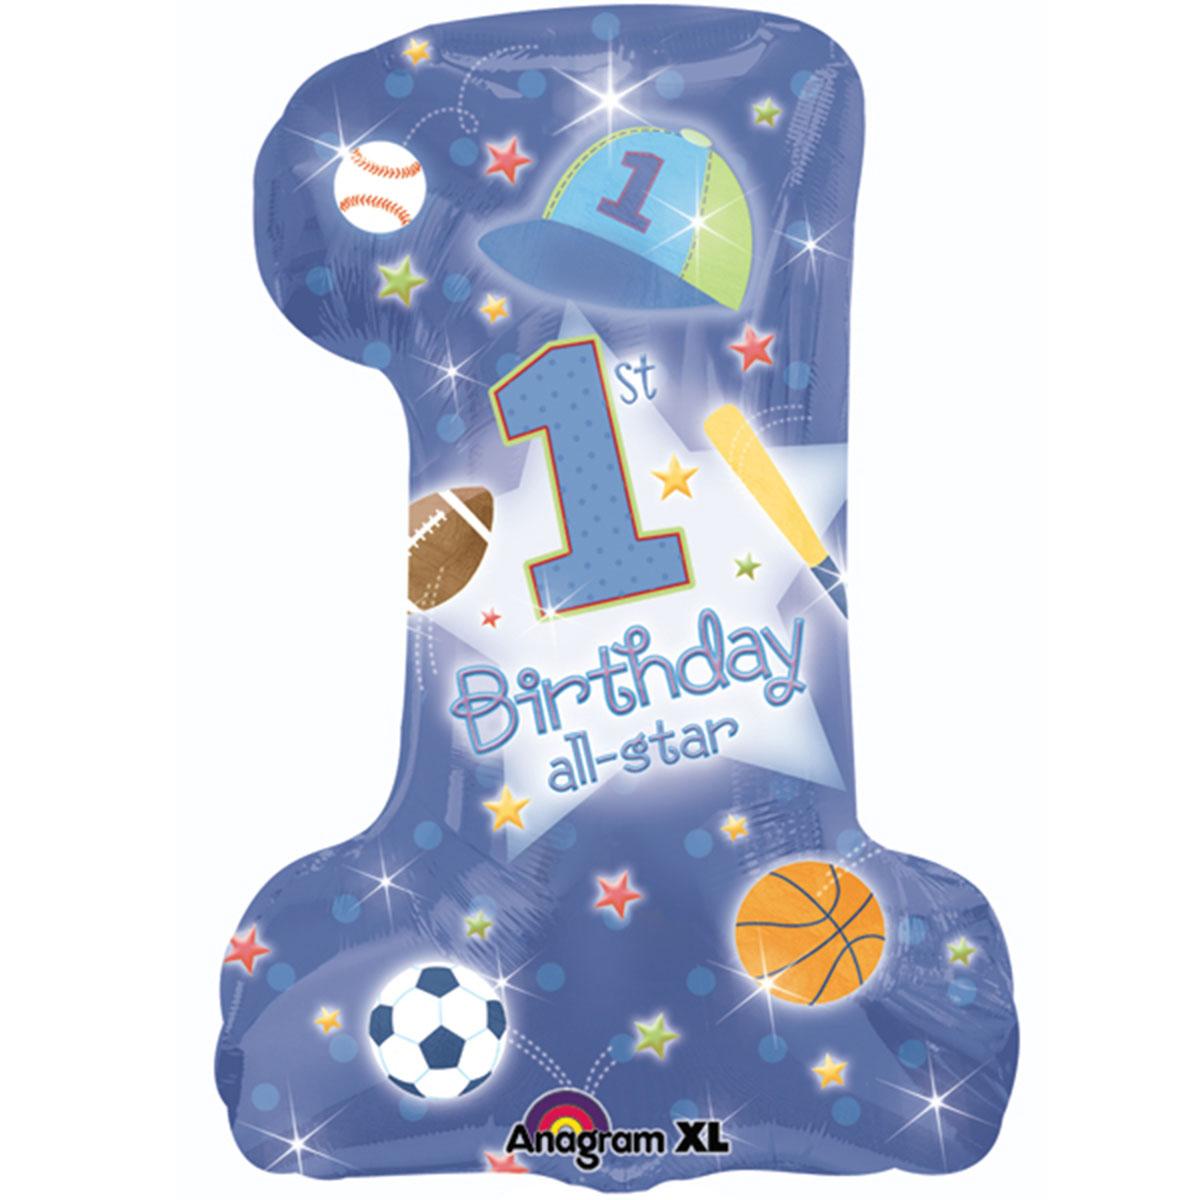 1st Birthday All Star Boy Foil Balloon 19 x 28in Balloons & Streamers - Party Centre